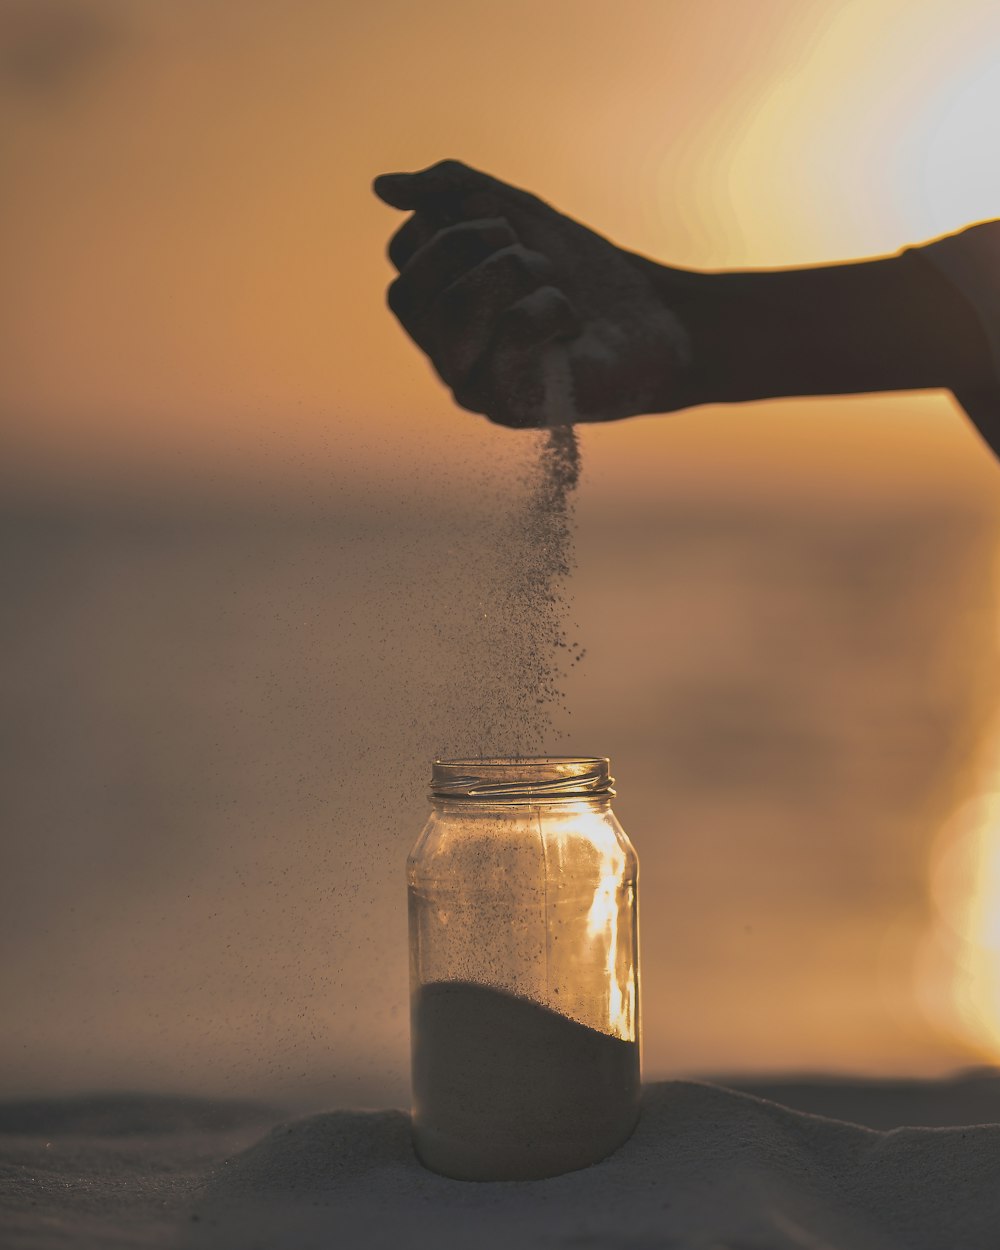 person holding sand putting on clear glass jar